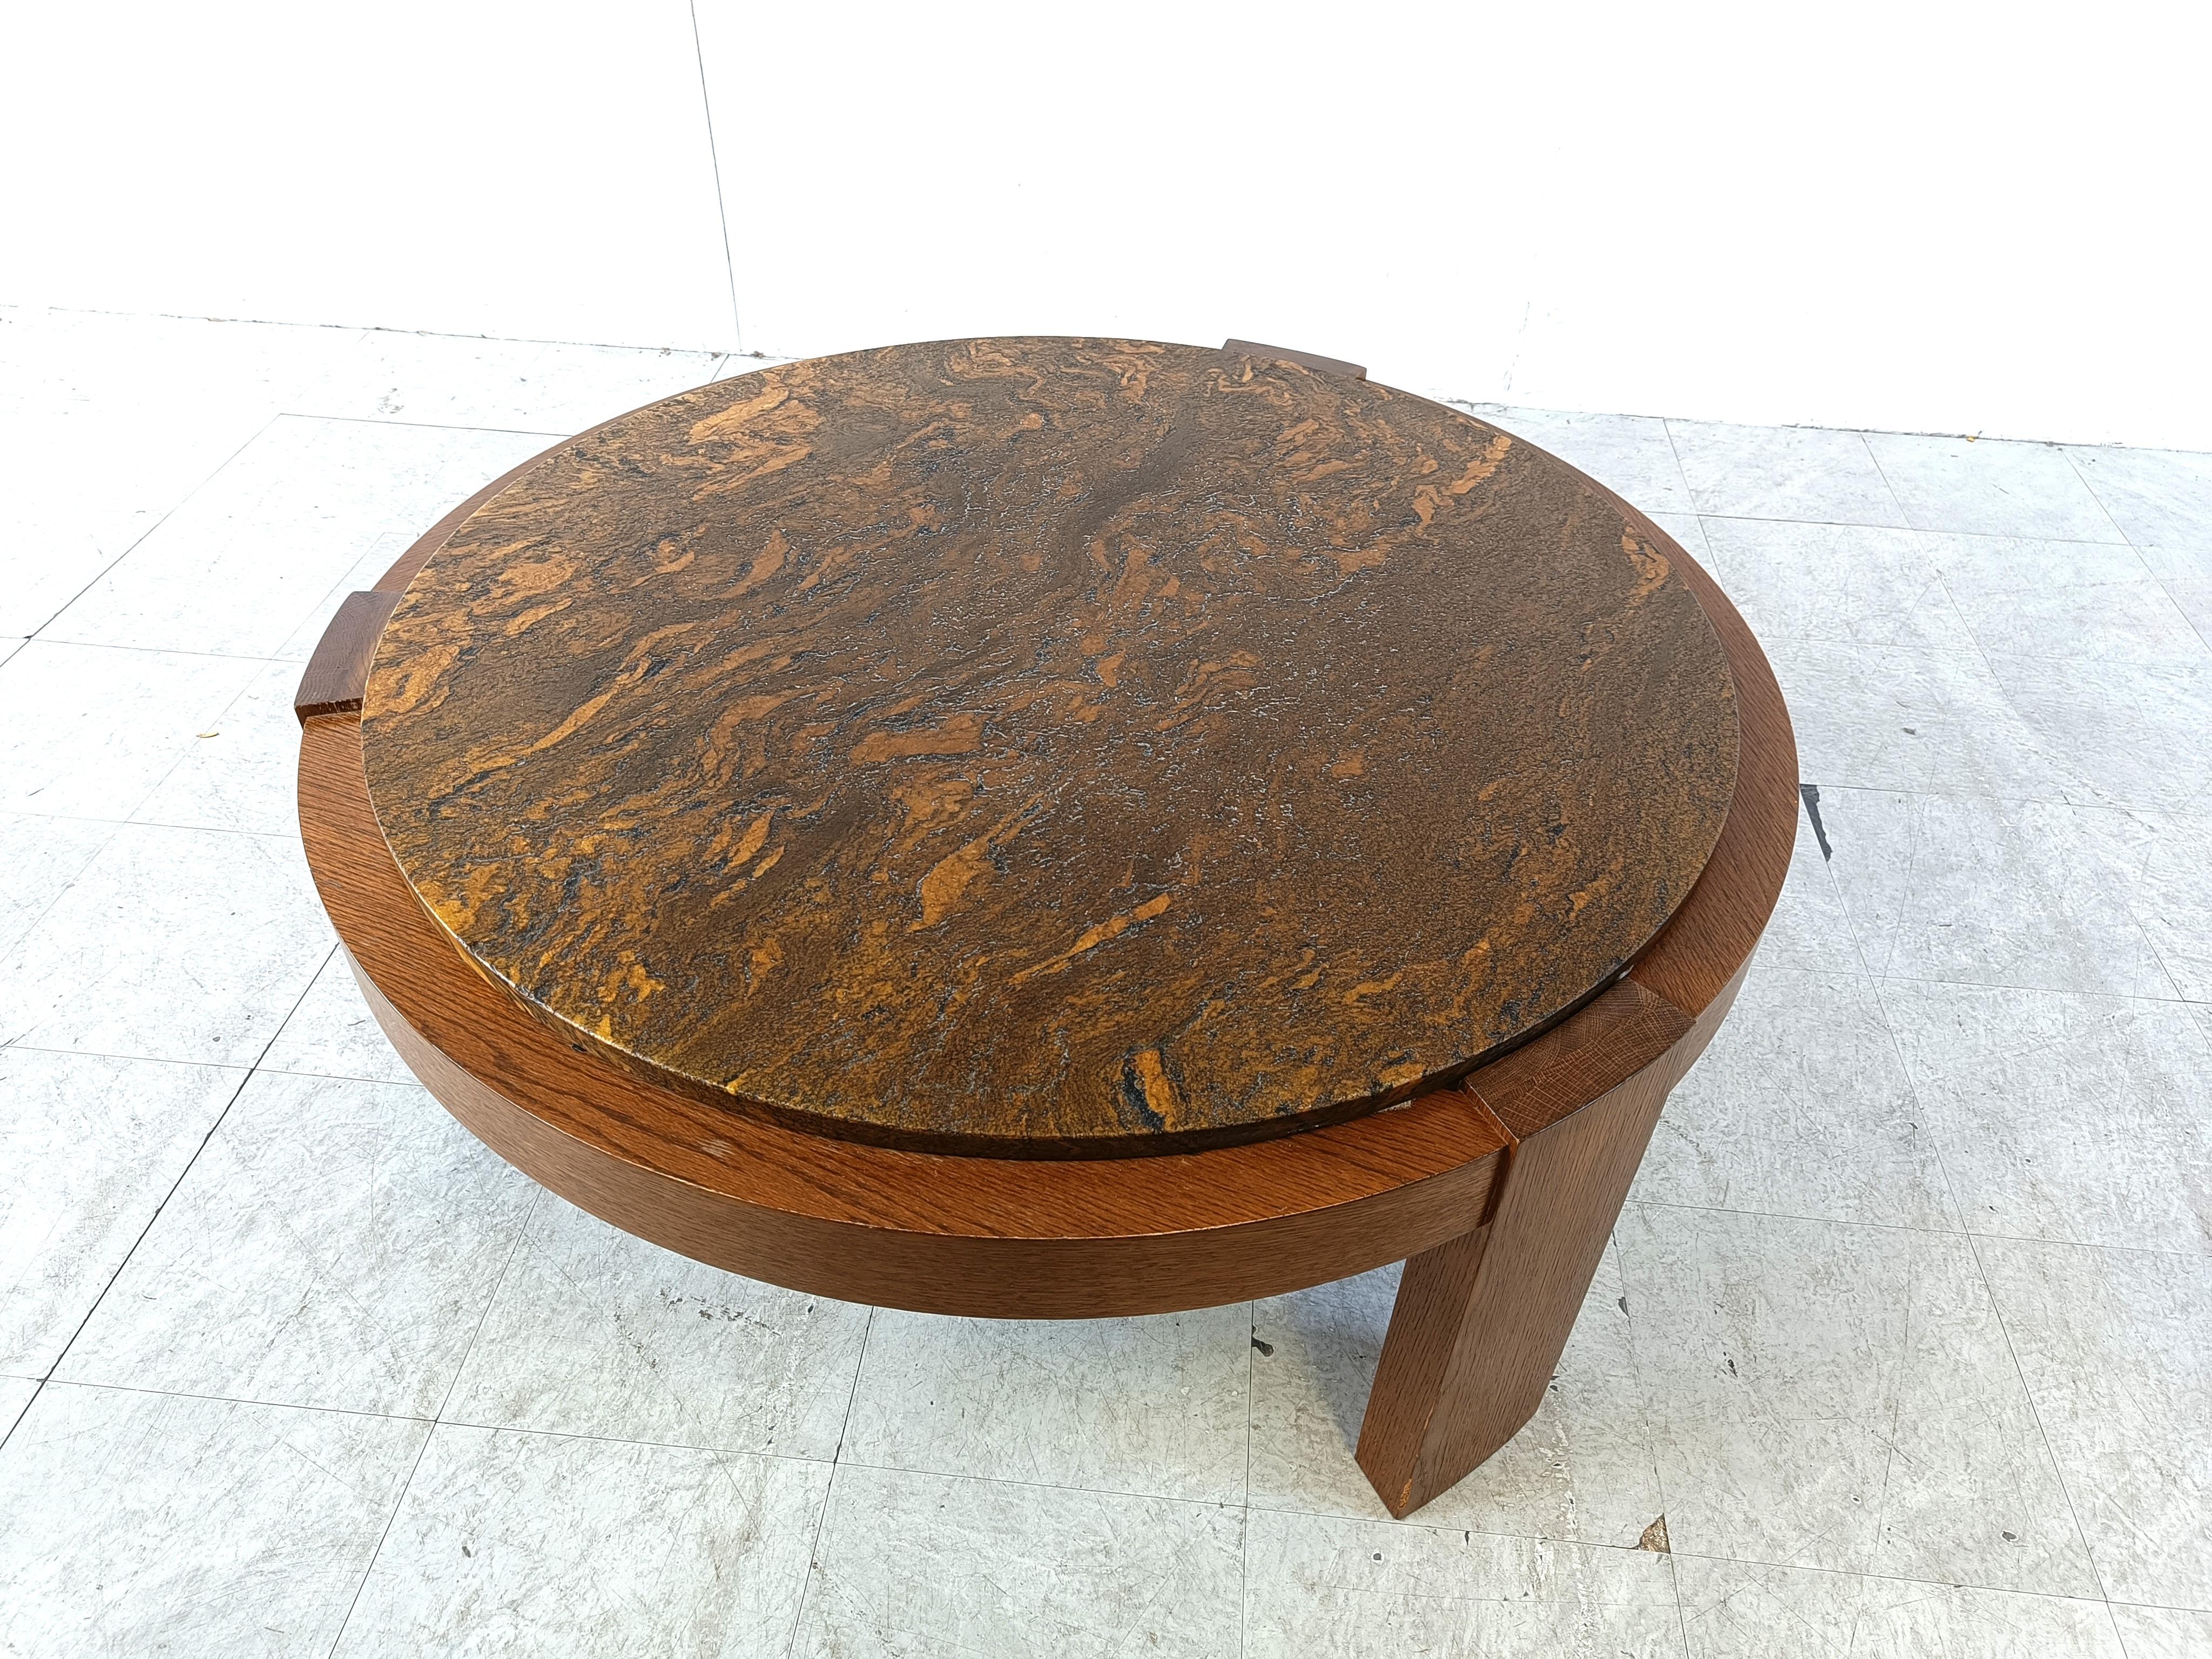 Tripod oak coffee table with a beautiful stone table top.

Rustic coffee table, with a sturdy, simple but attractive oak frame and a beautifully naturally coloured table top.

1970s - Germany

Height: 48cm
Diameter: 110cm

Ref.: 612929